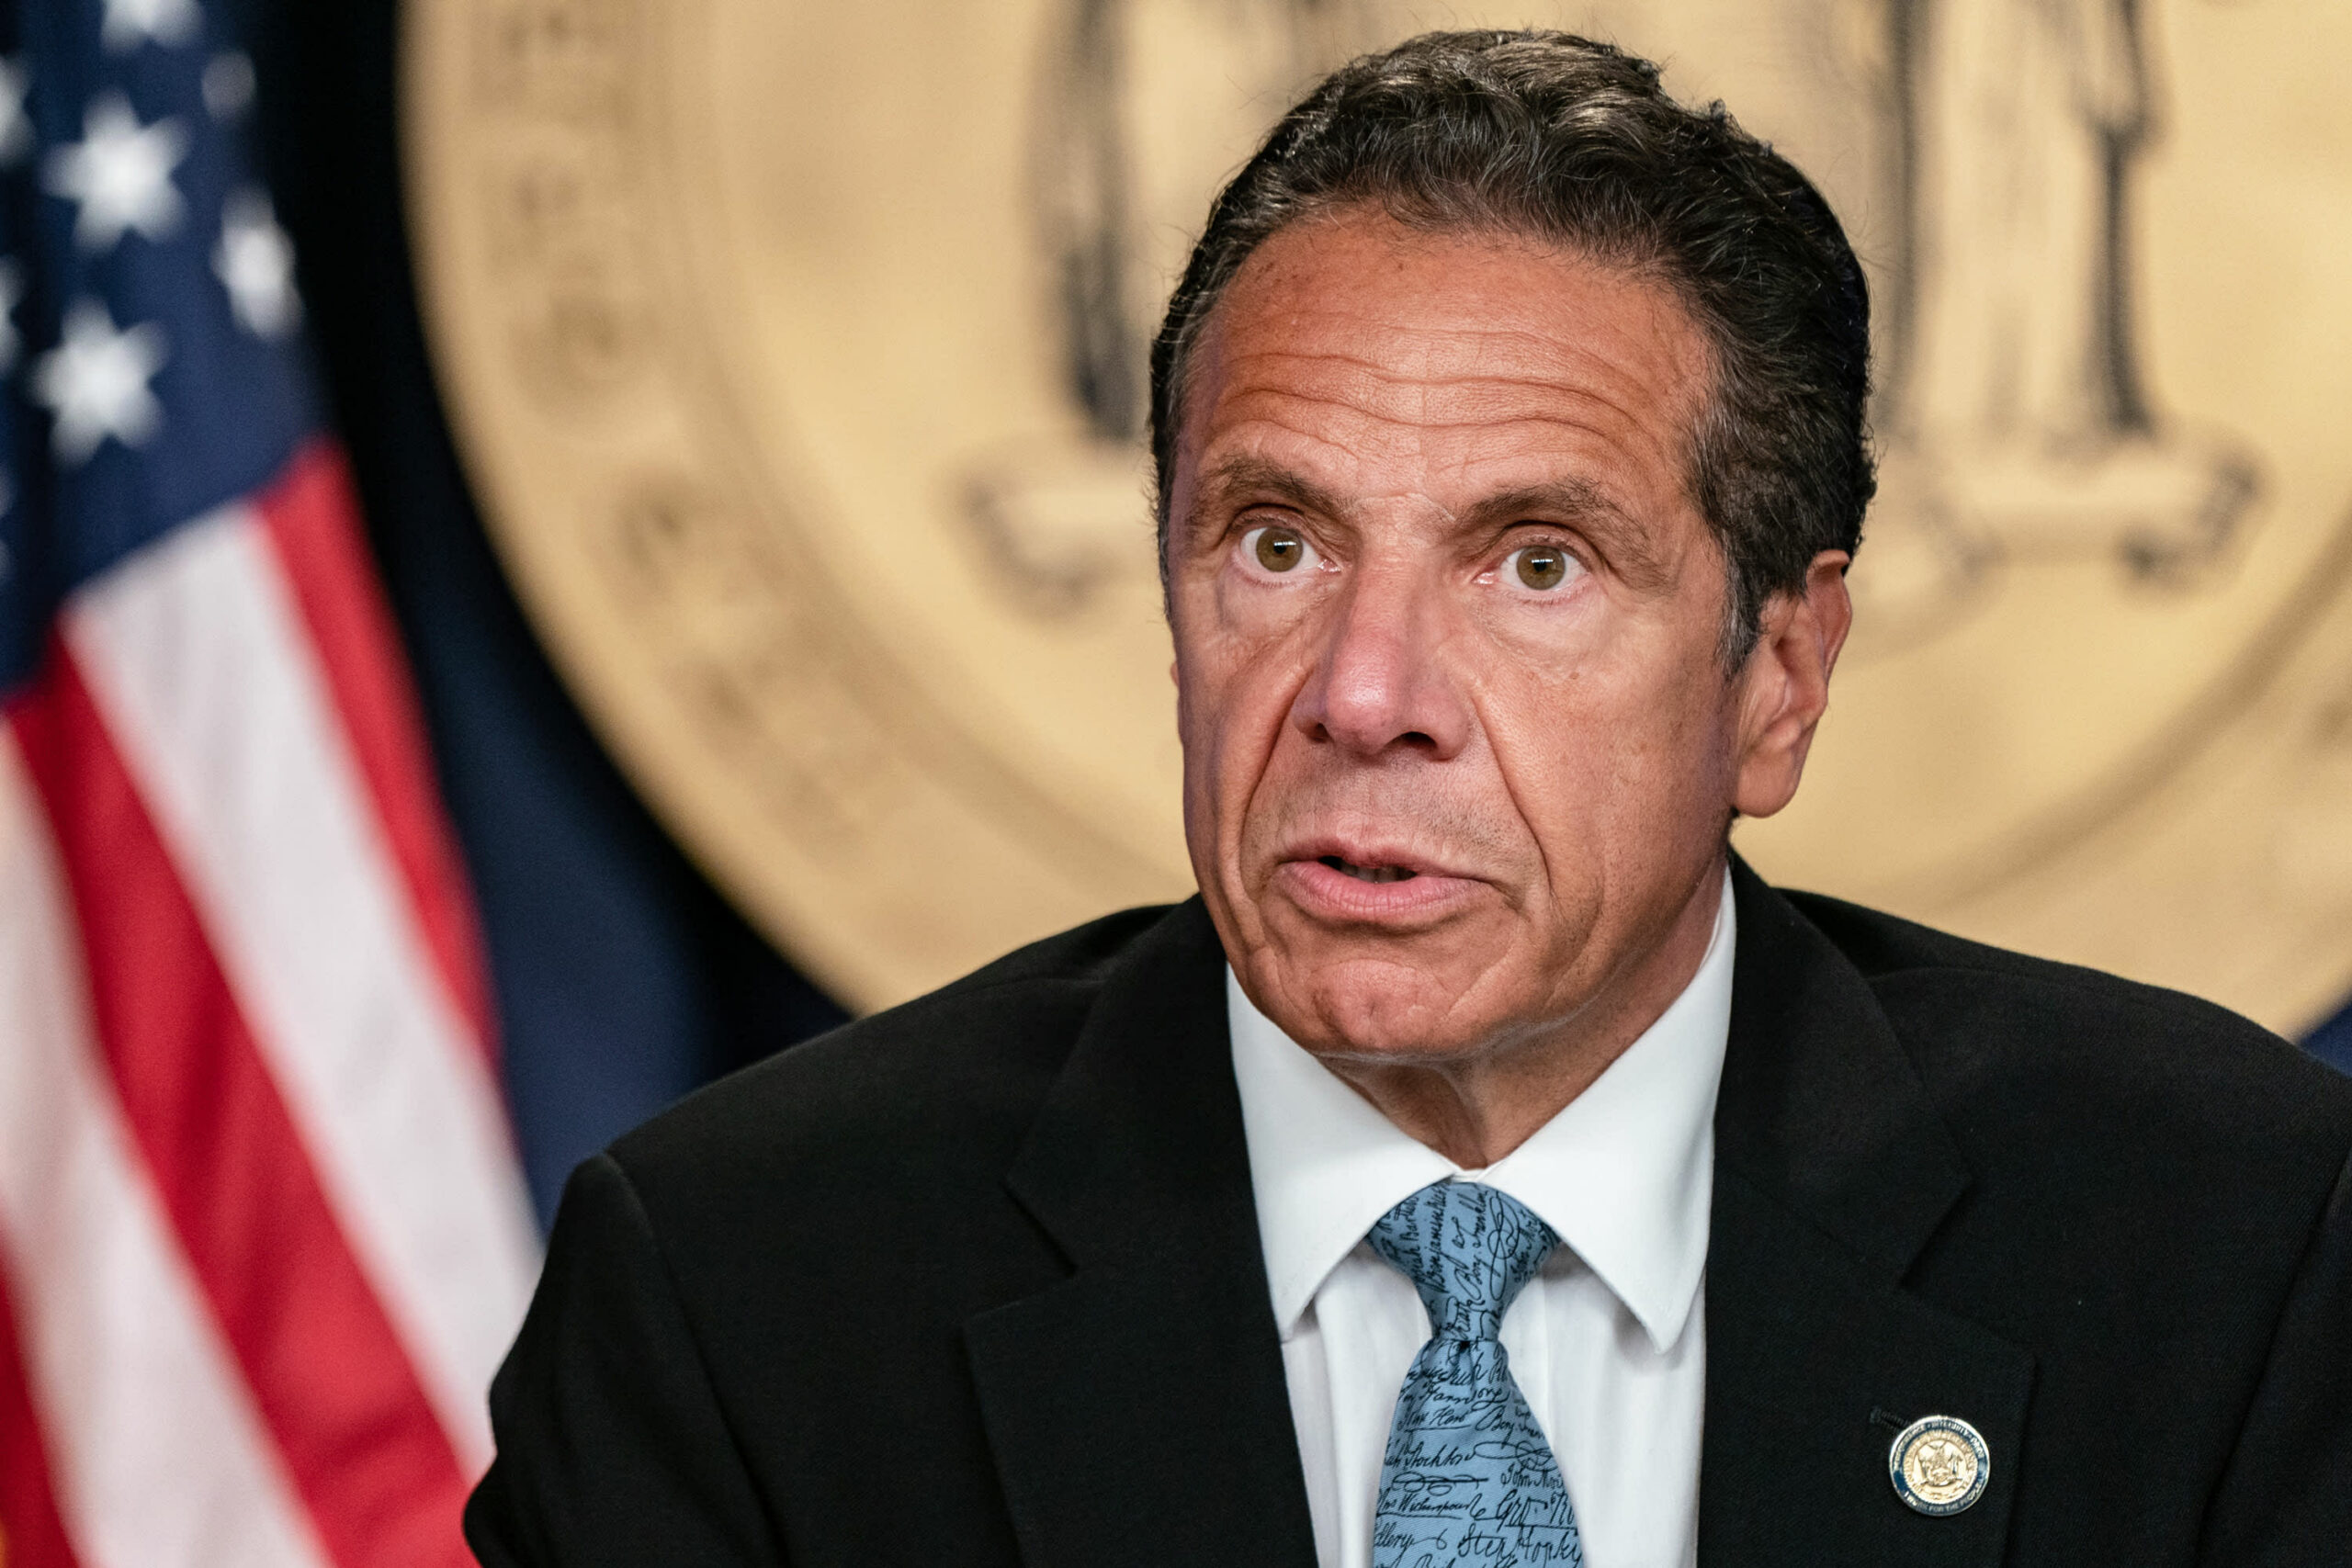 Gov. Cuomo’s ‘informal sexism’ hinders equality for everybody, writer says